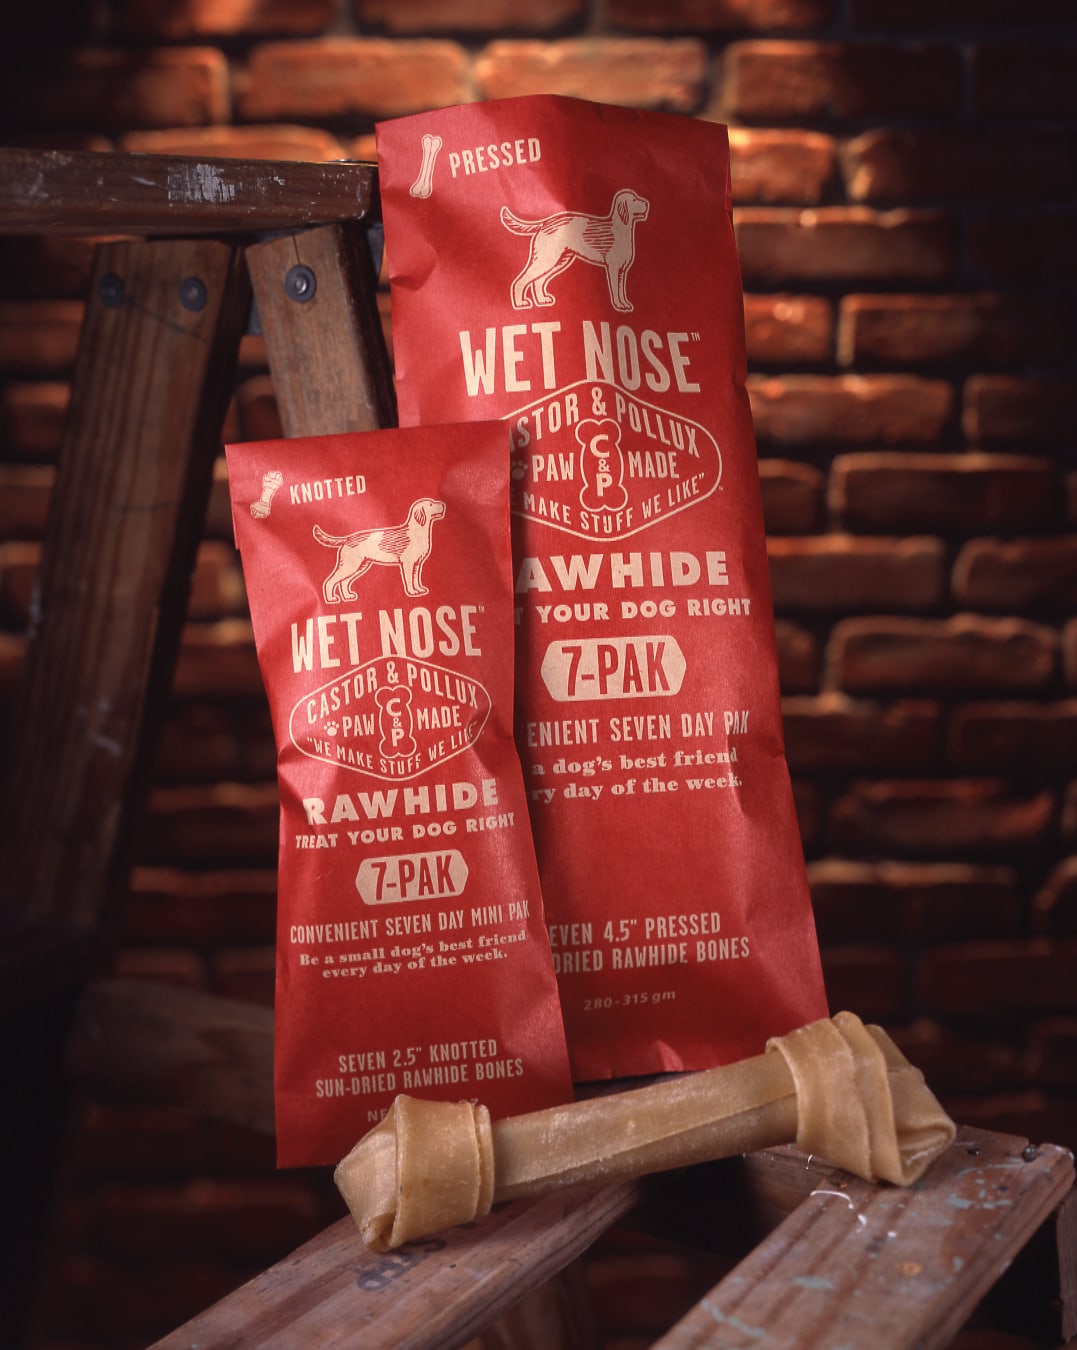 Castor & Pollux Dog Rawhide Chew package design